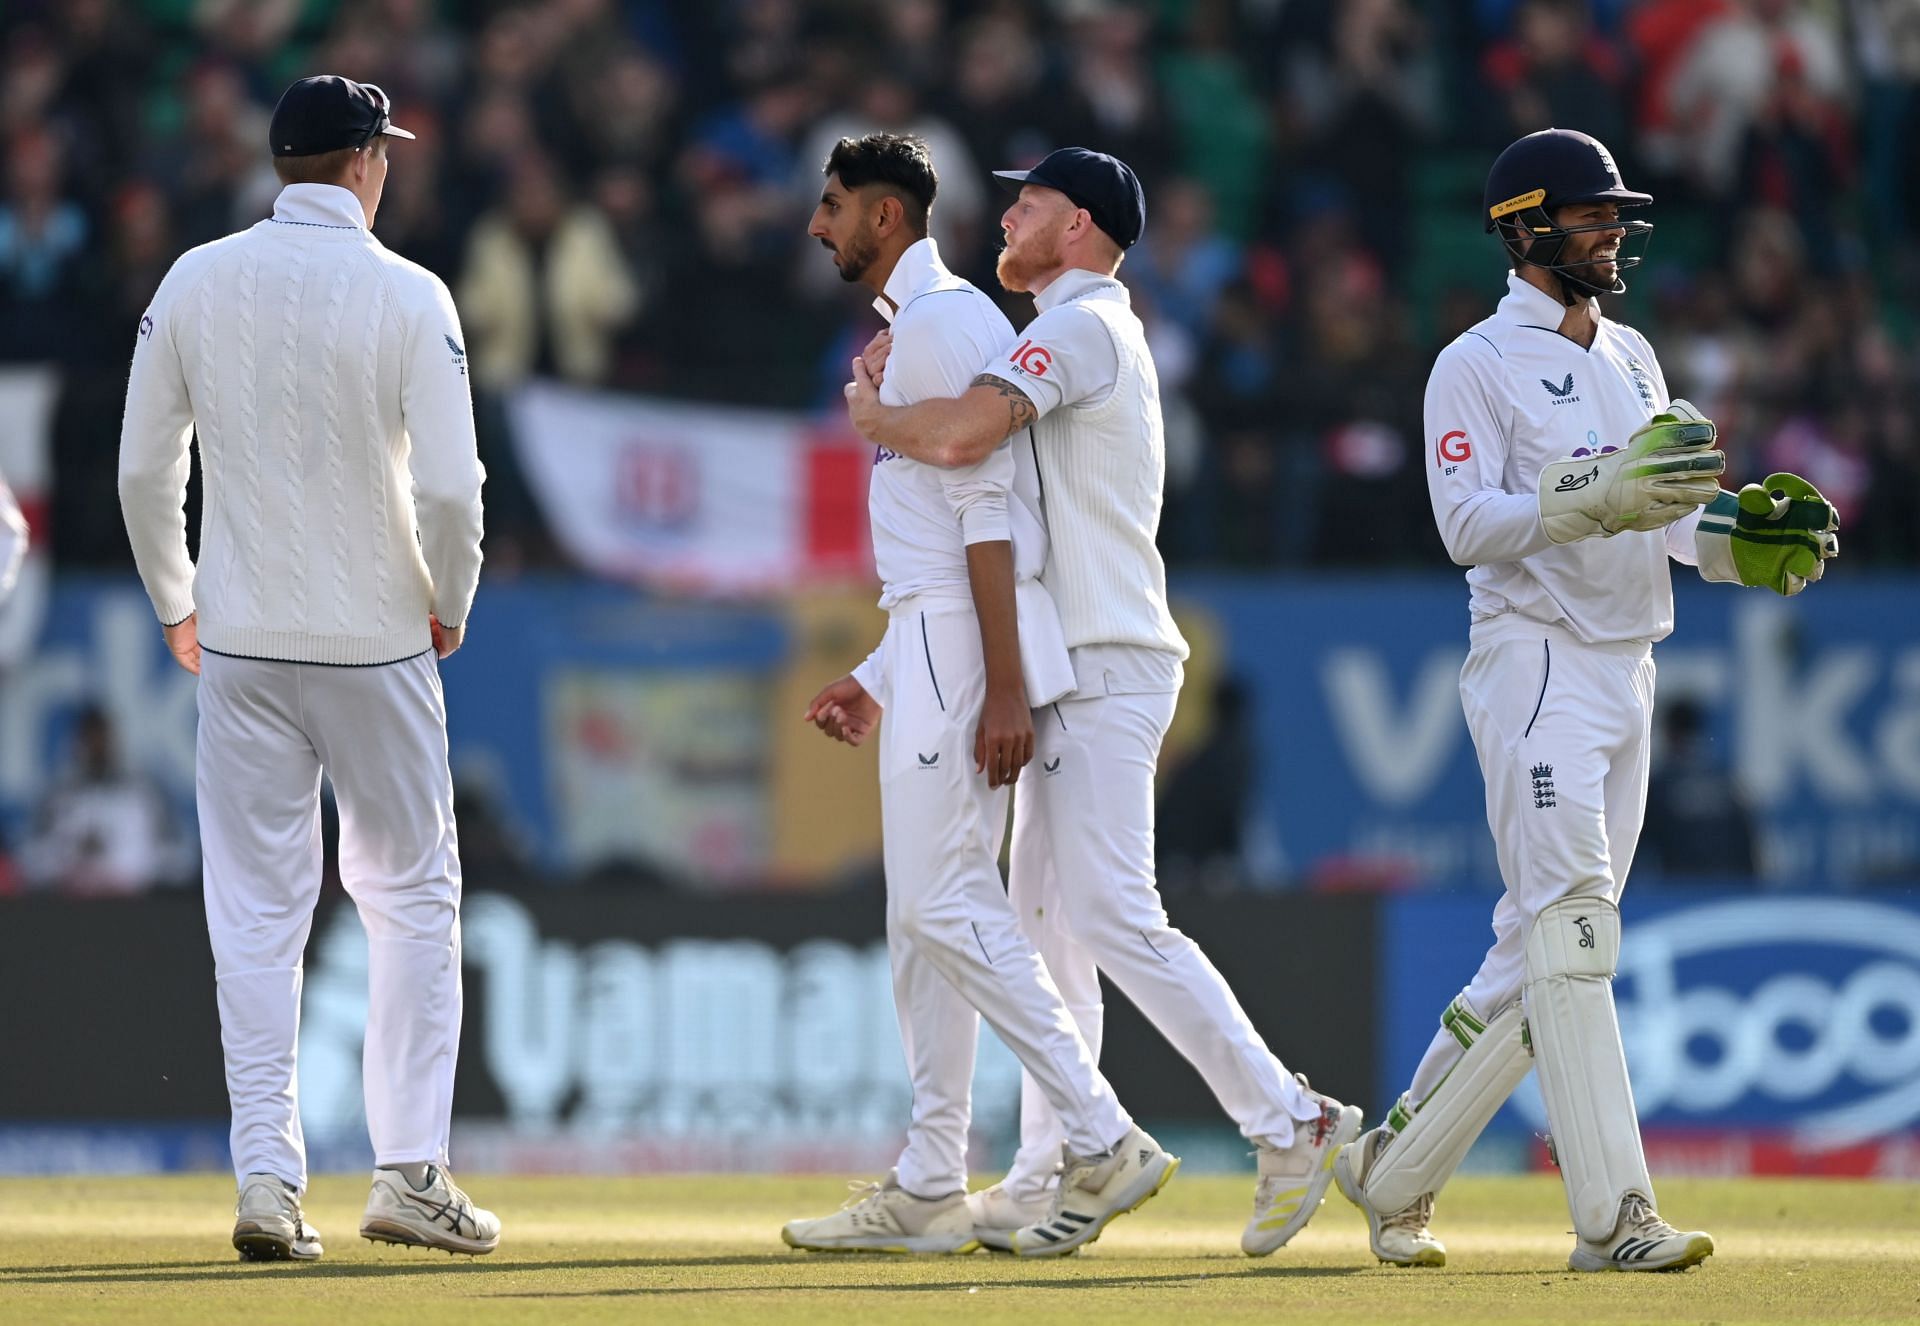 England spinners have toiled hard despite limited international experience.